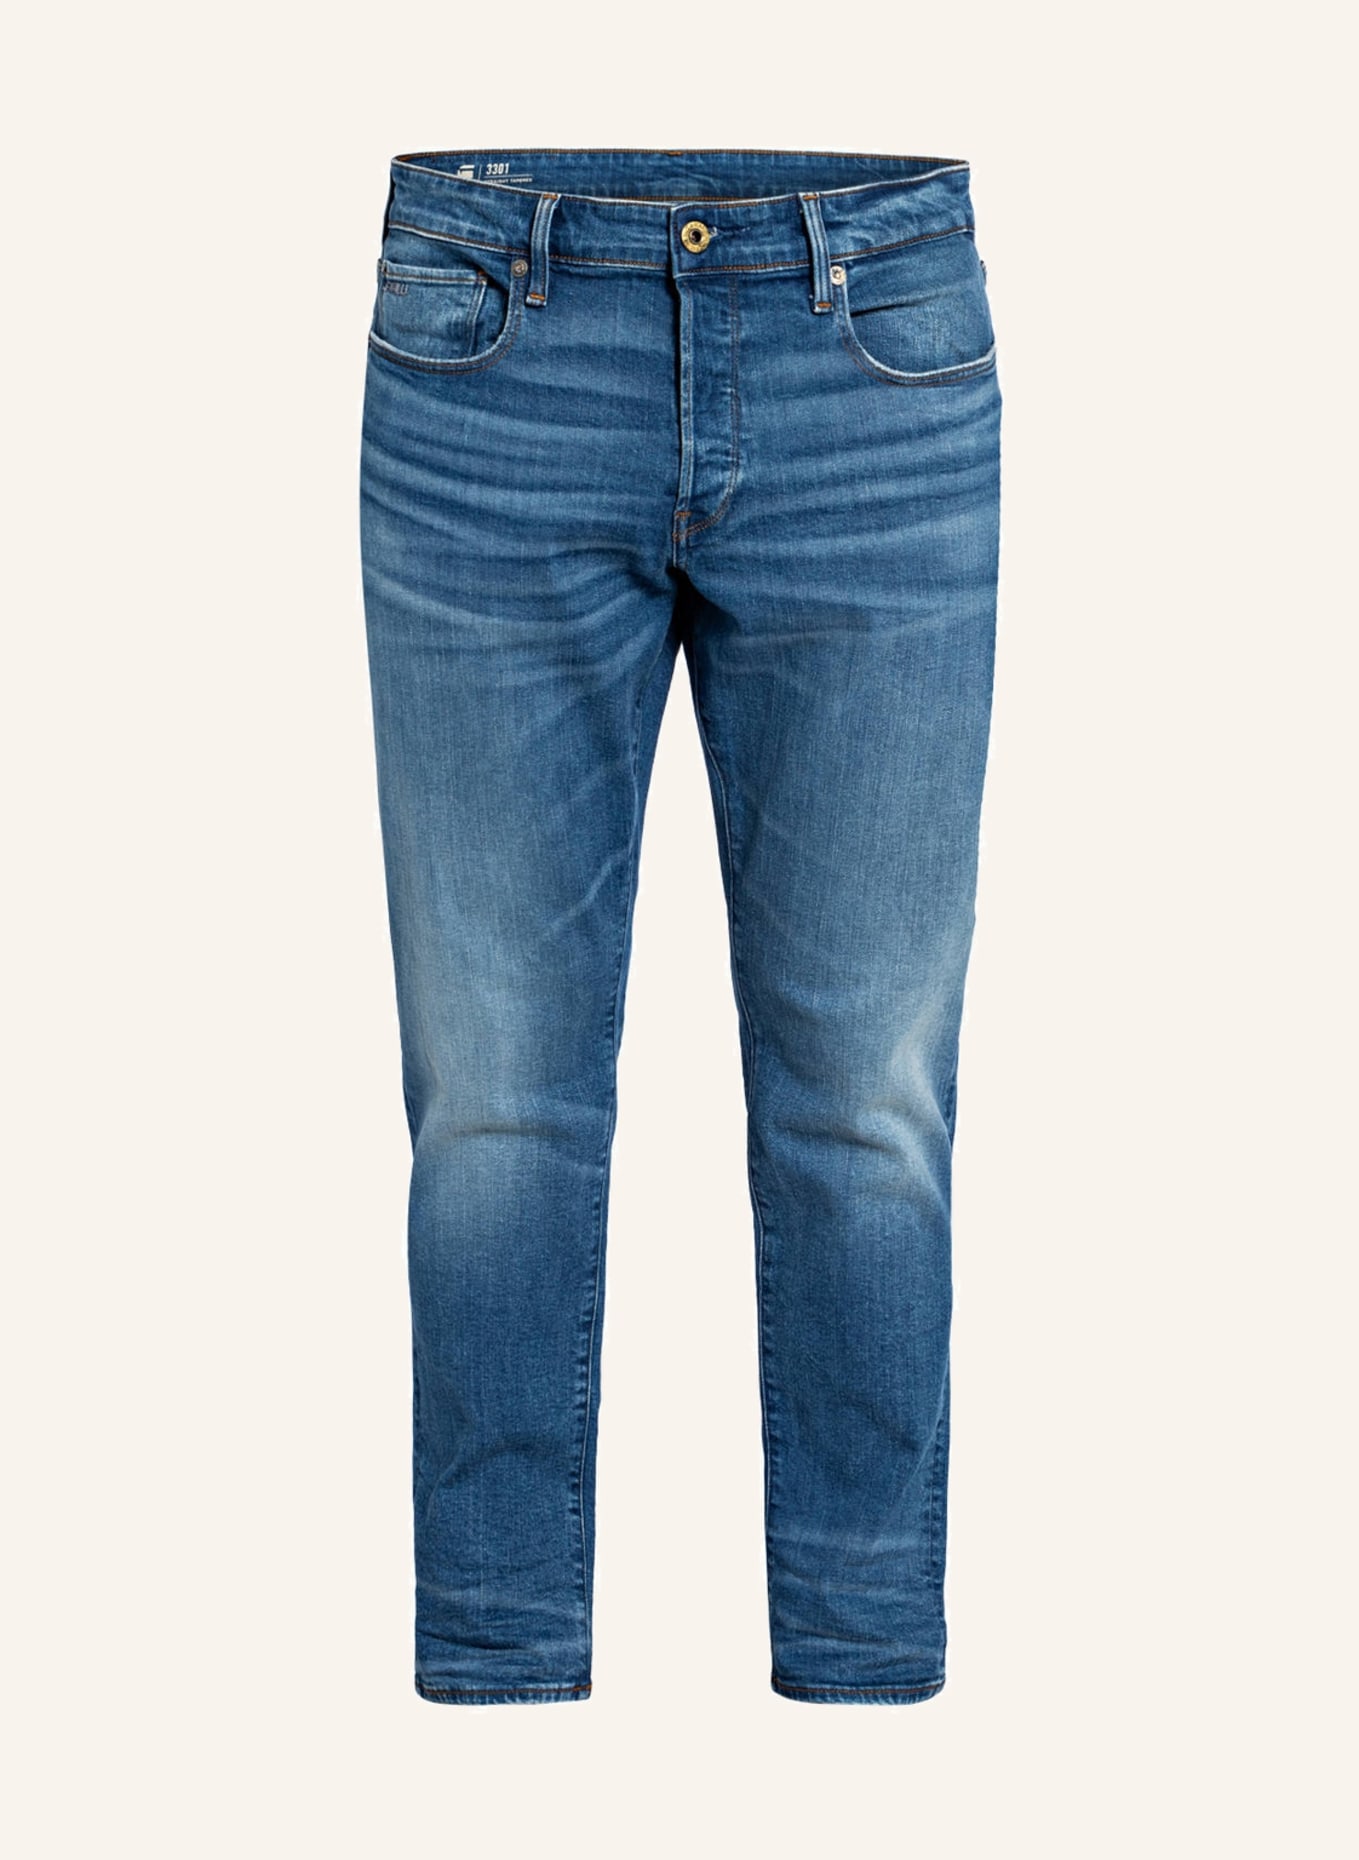 G-Star RAW Jeans 3301 Straight Tapered Fit, Farbe: A795 WORN IN AZURE BLUE (Bild 1)